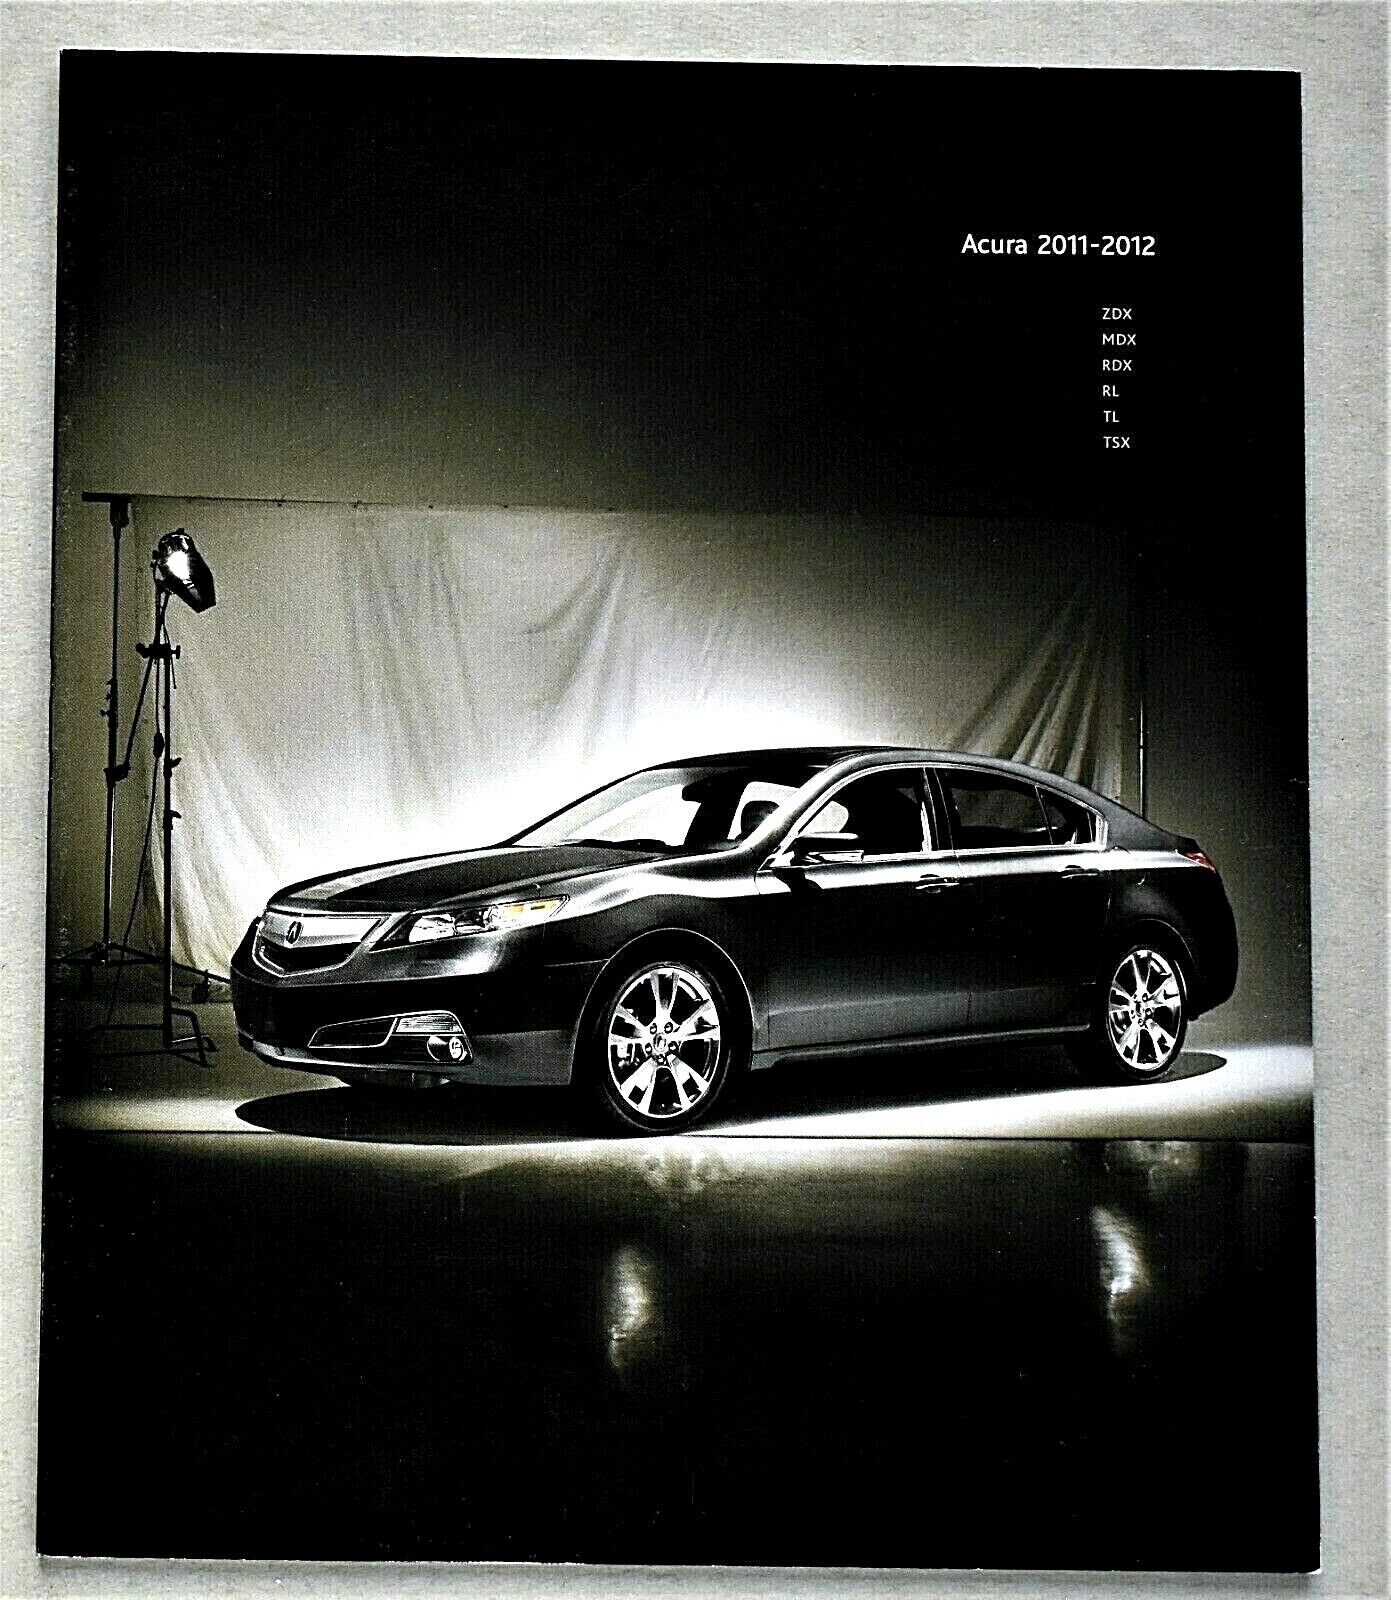 Amazing 2011 2012 Acura Full Line Sales Brochure ~ 36 Pages ~ 11" X 9"